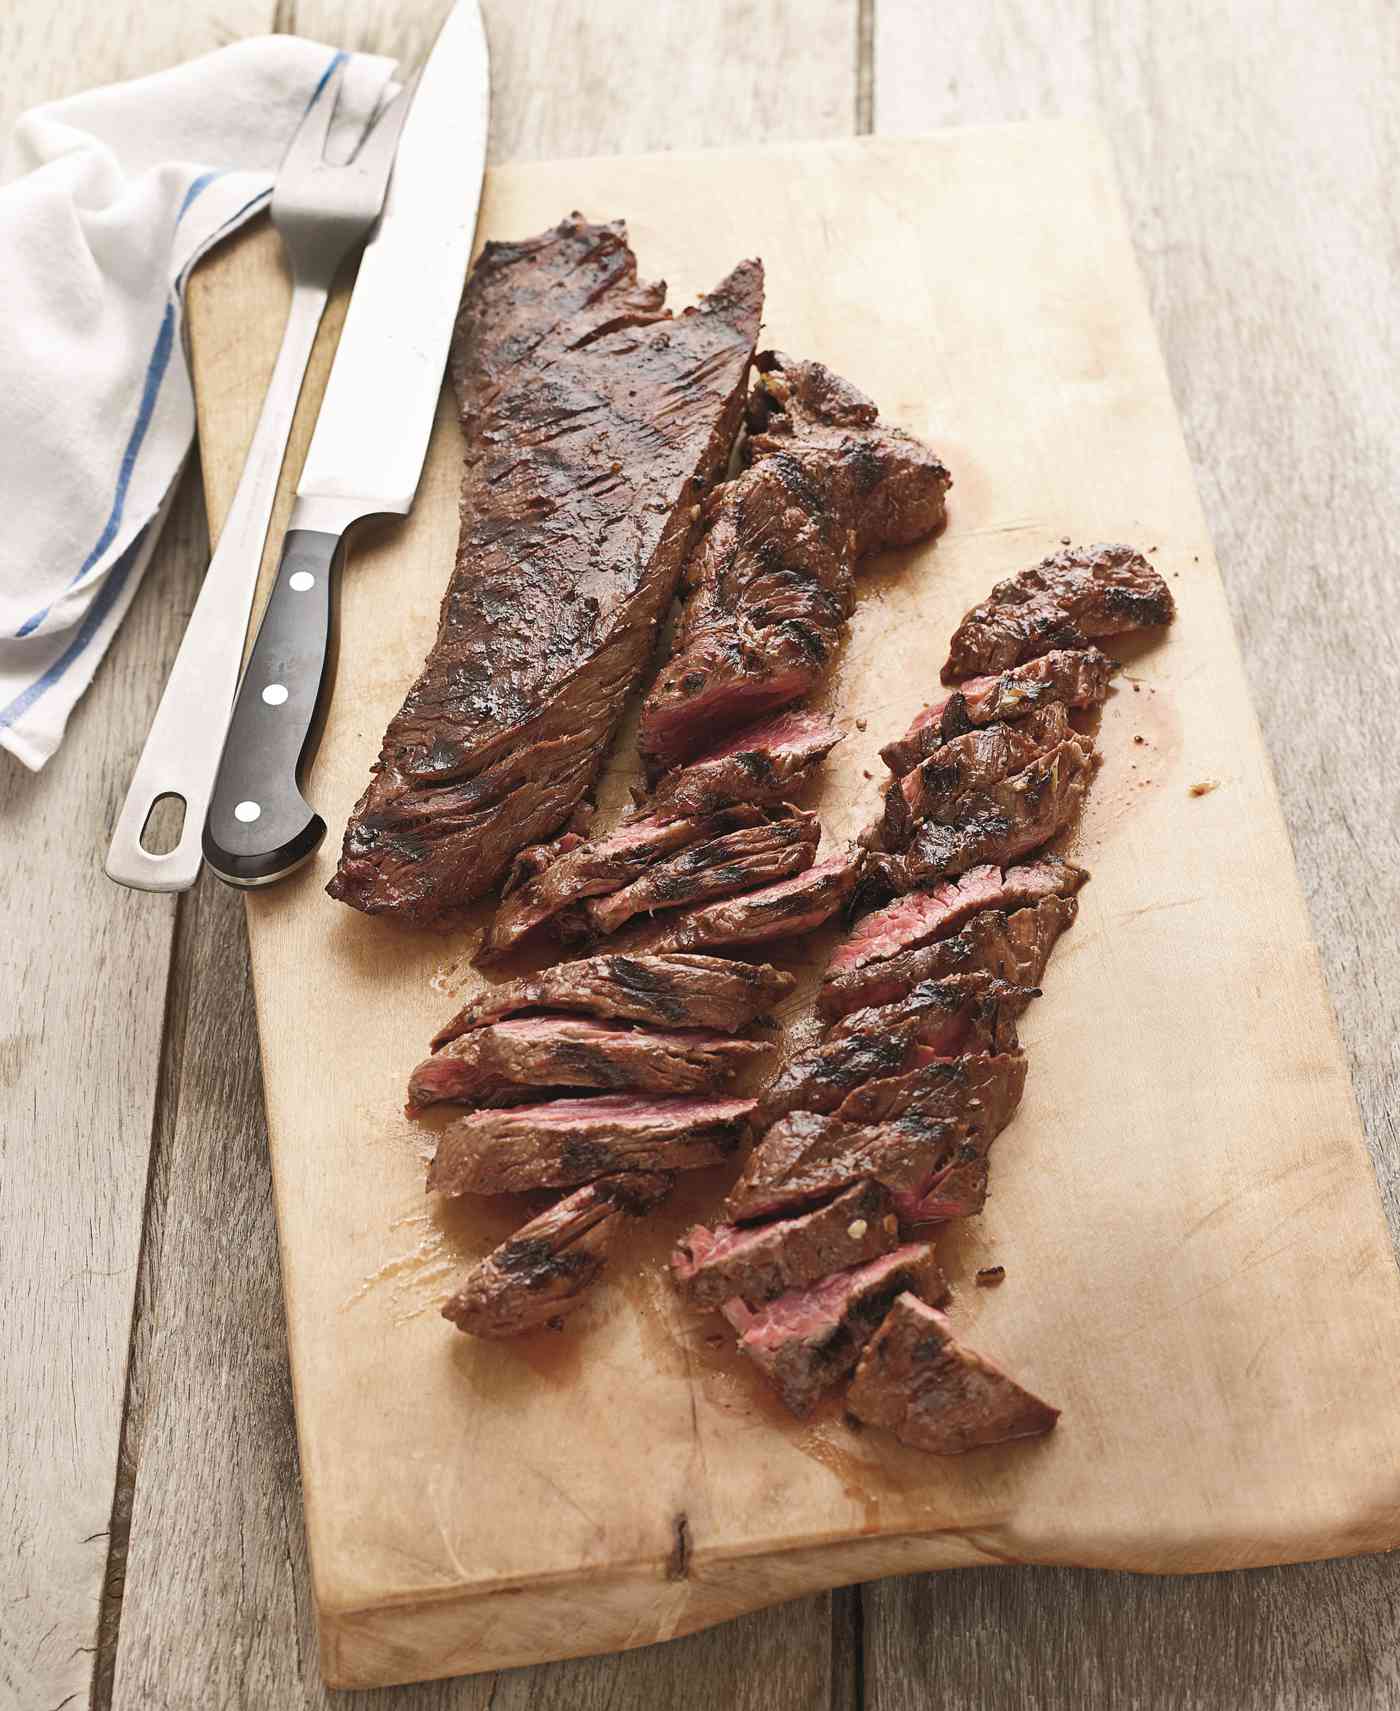 These Affordable Cuts of Steak Are Perfect for Weeknight Grilling